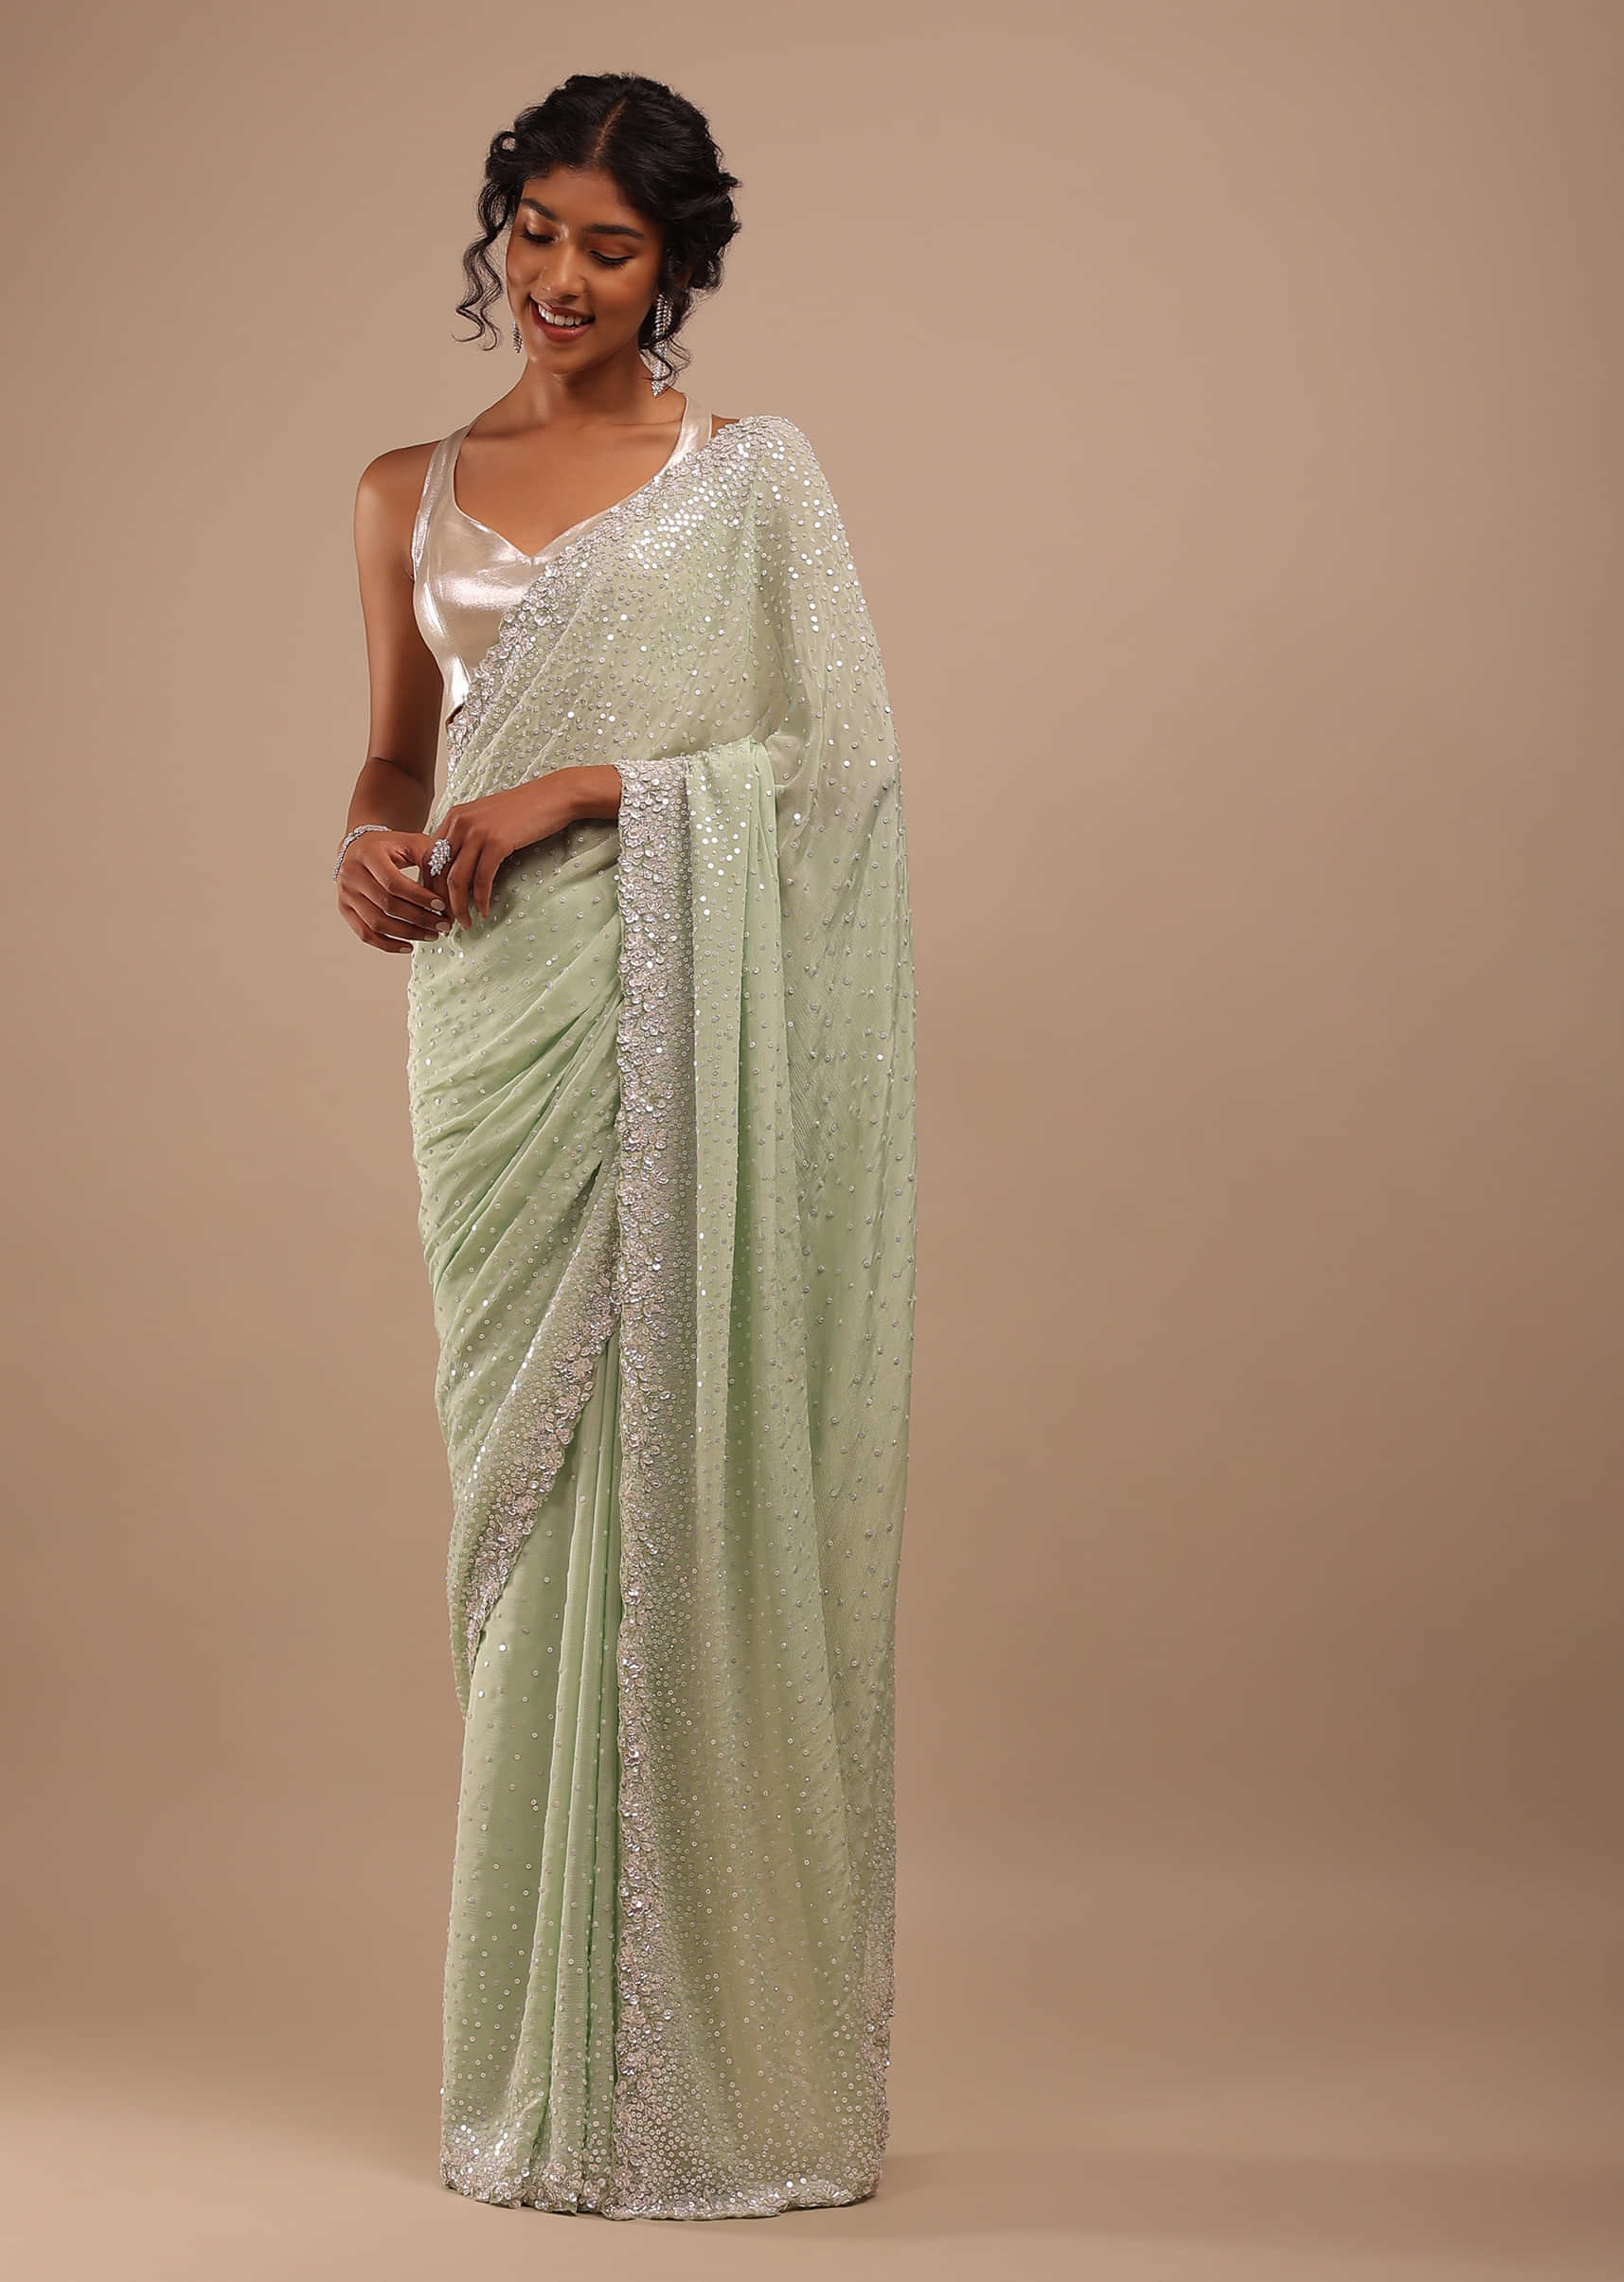 Foam Green Chiffon Saree In 3D Silver Petal And Floral Motifs Embroidery With Sequins Cascading Down